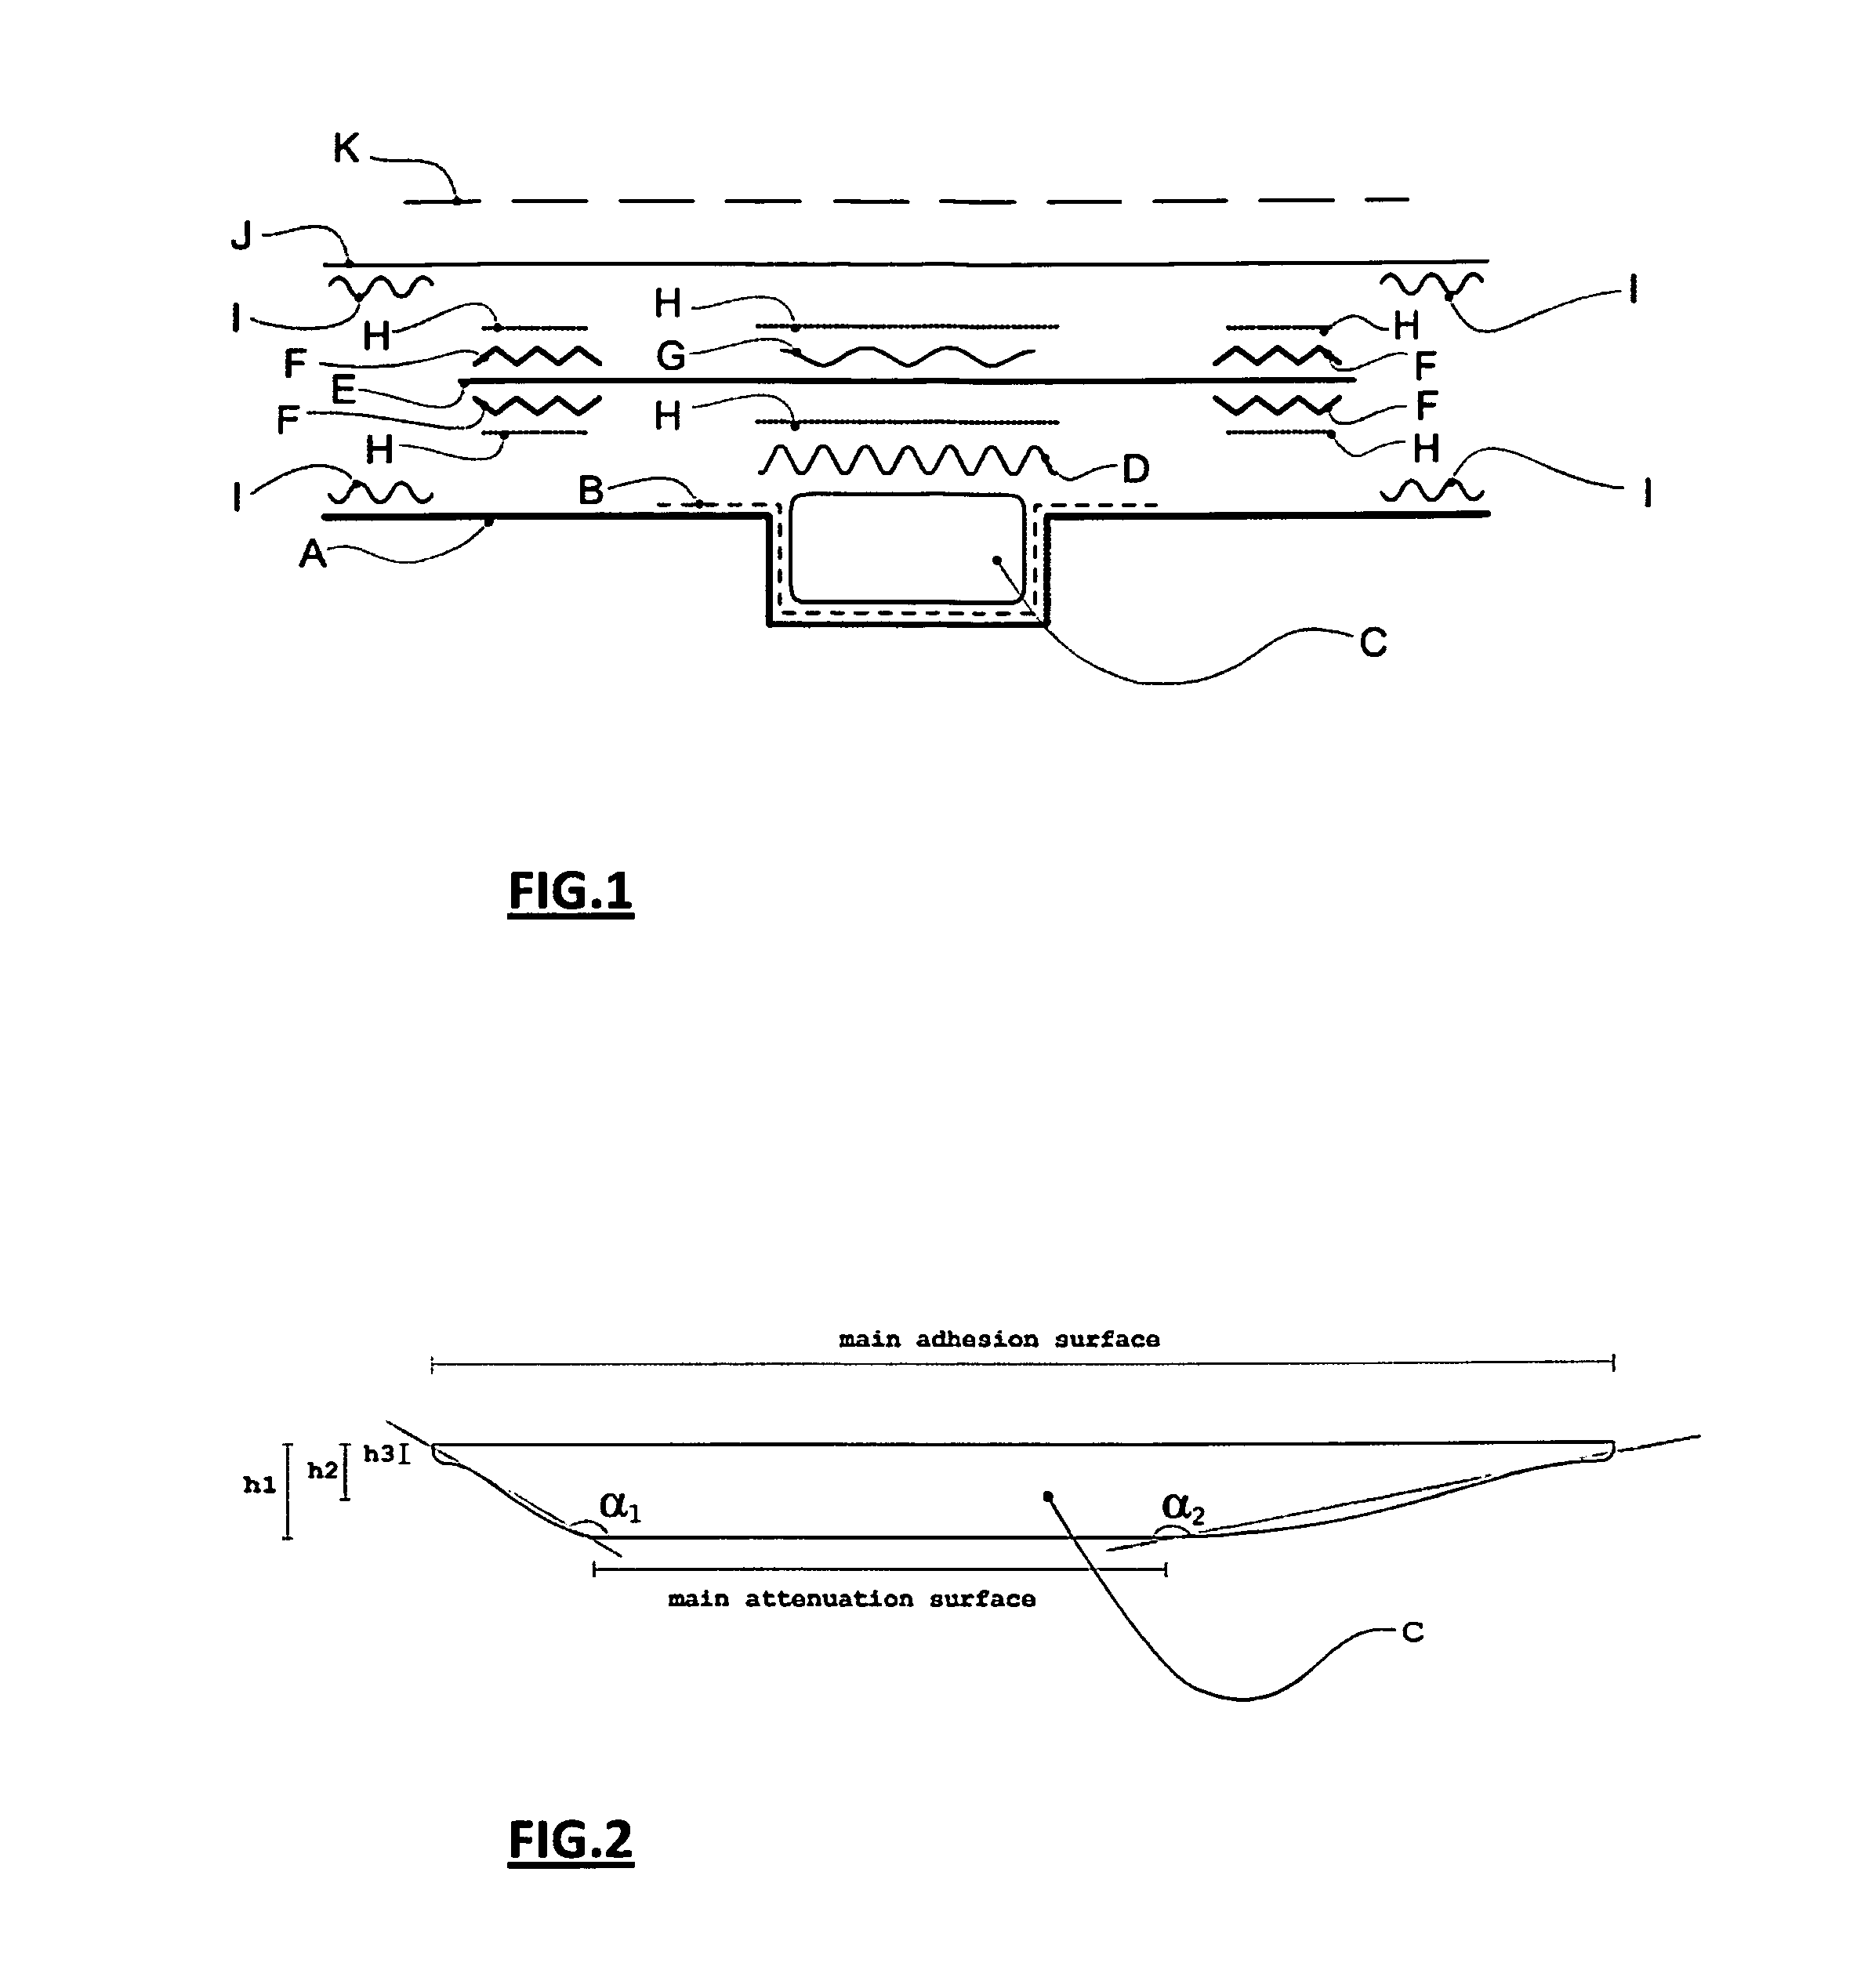 Radiation protection device